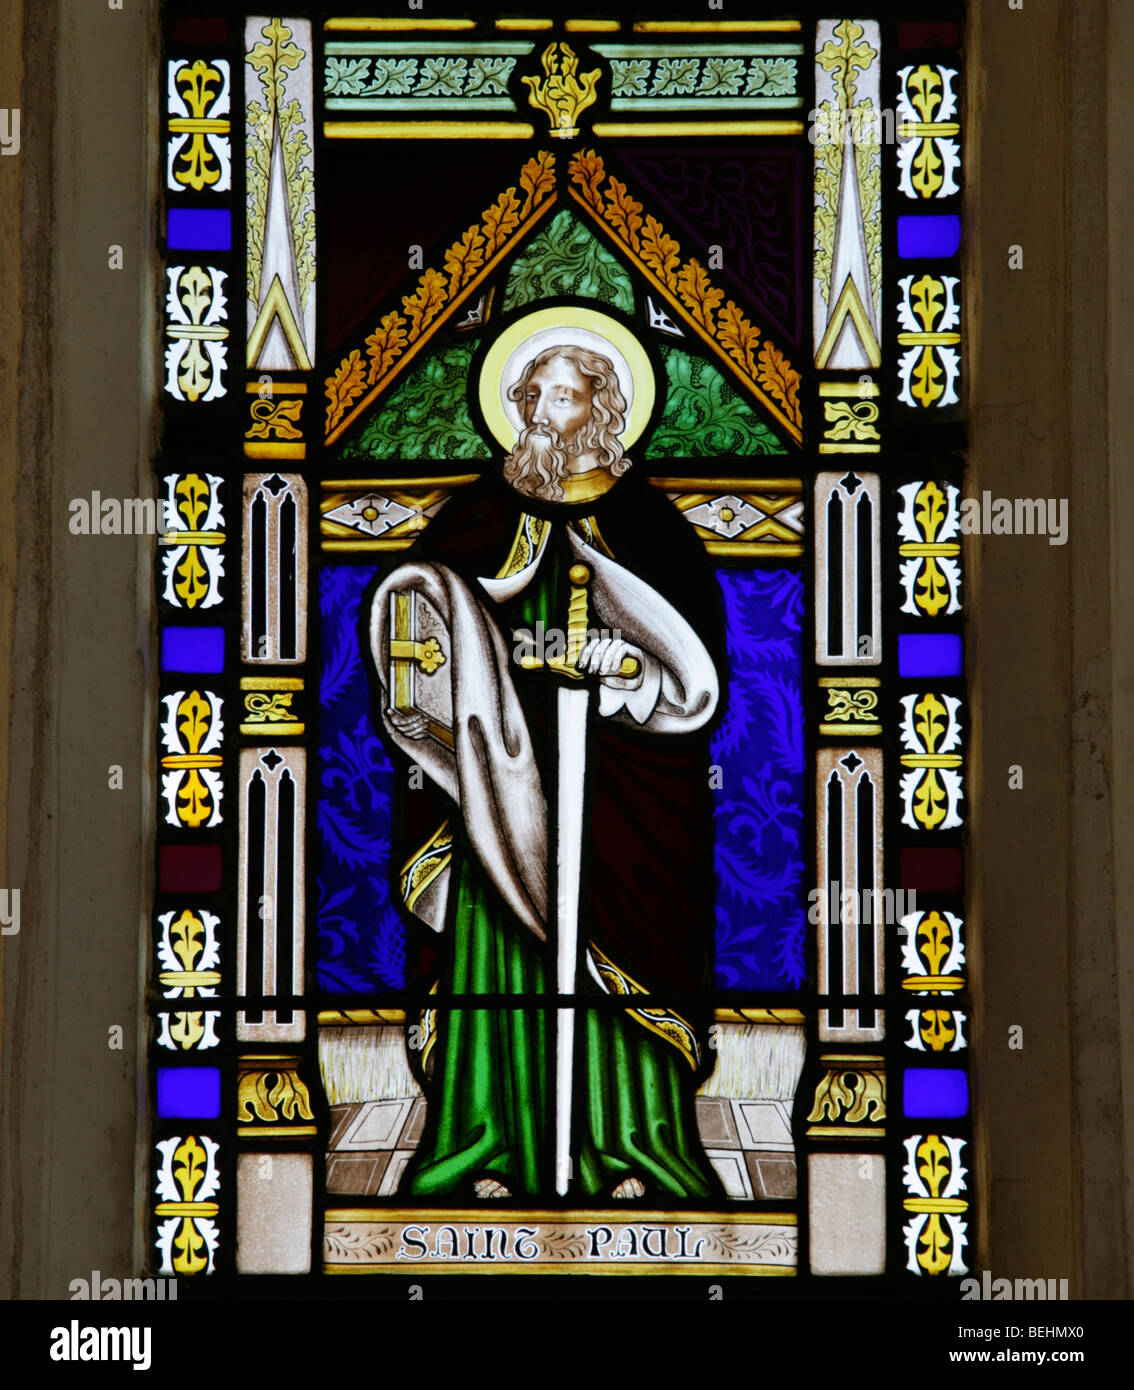 A stained glass window depicting St Paul the Apostle holding a sword and book, All Saints Church, Wighton, Norfolk Stock Photo